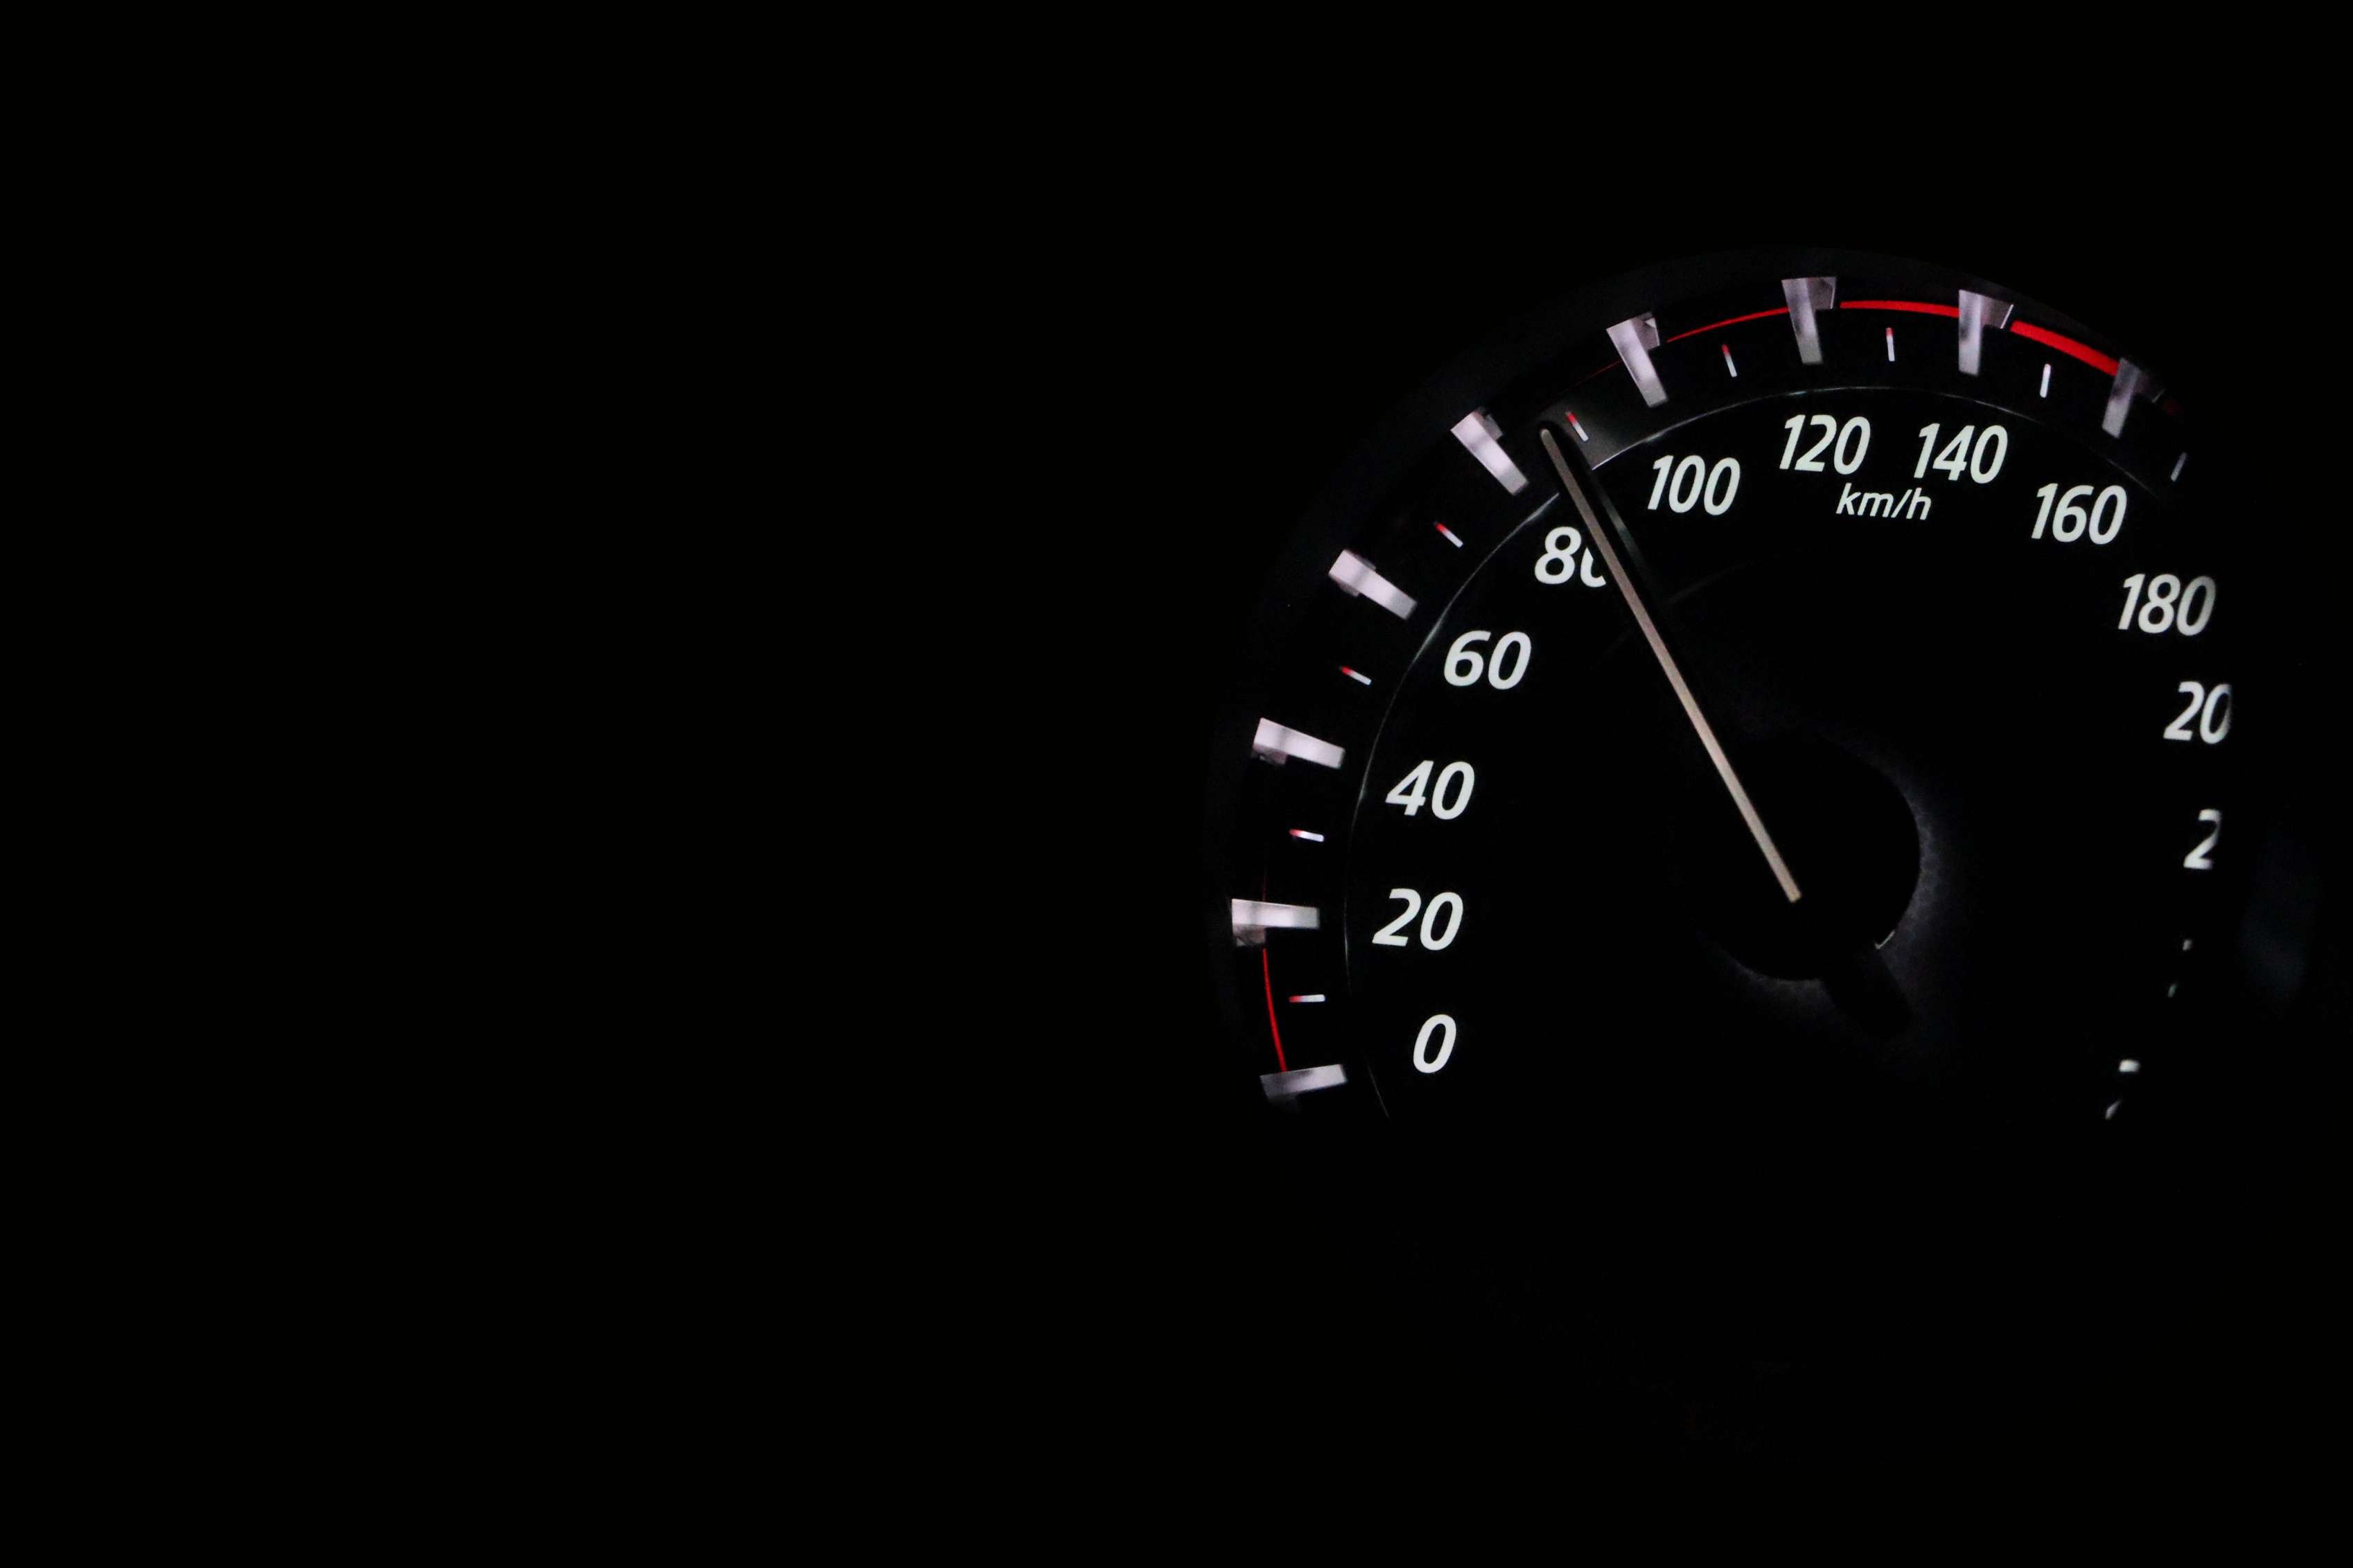 Speedometer at night showing over 80 mph